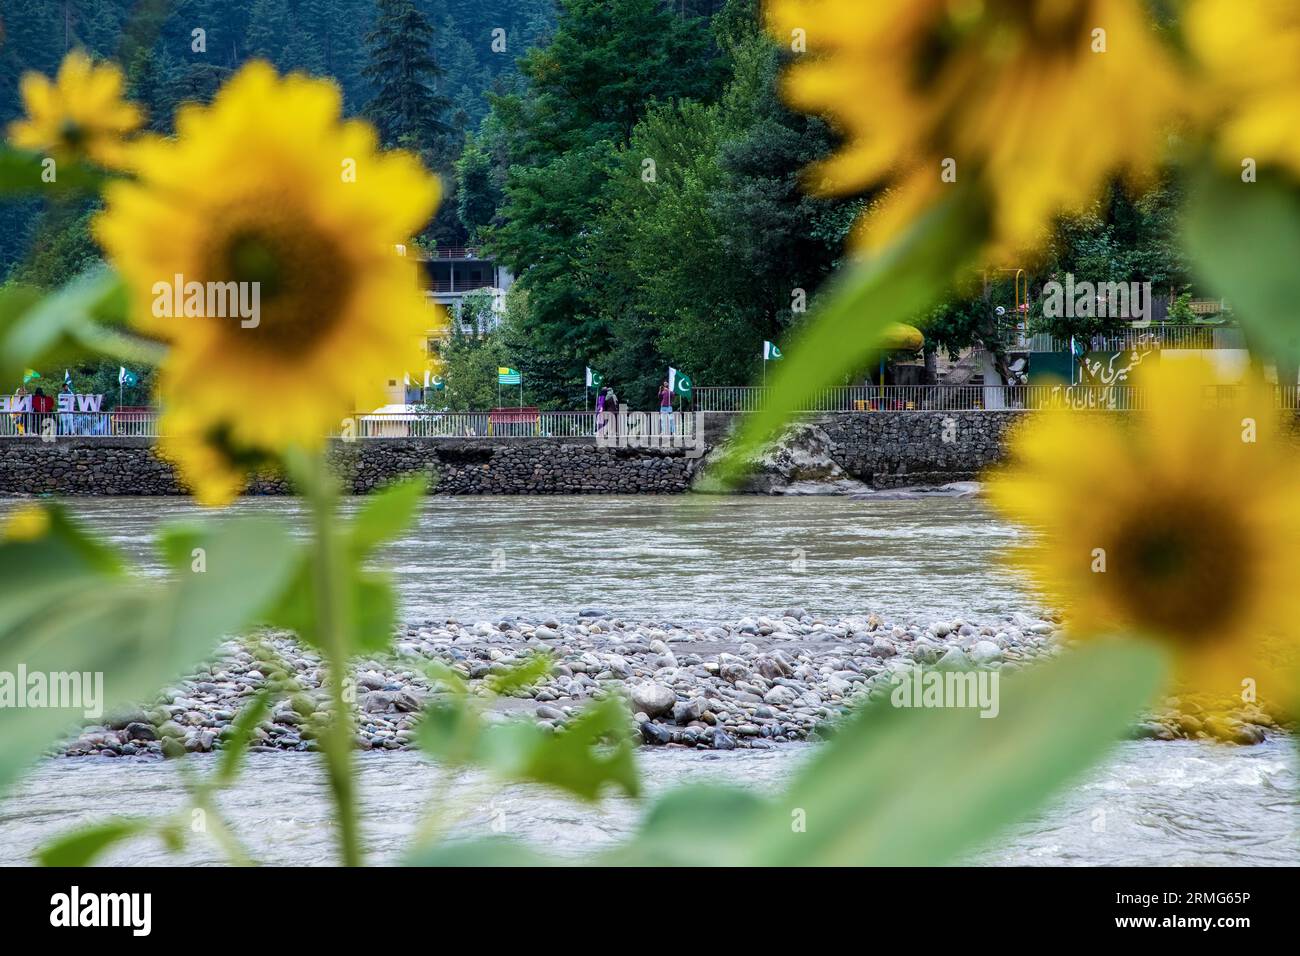 Keran Kupwara, India. 25th Aug, 2023. Pakistani and Kashmiri flags are seen installed on the banks of Neelam river or Kishan Ganga that has divided Kashmir into two parts controlled by nuclear rivals India and Pakistan. The river acts as a disputed line of control and flows through a village called Keran from both sides which is located on the northern side of Indian Kashmir's Border district Kupwara some 150kms from Srinagar and 93kms from Muzaffarabad, in the Pakistan side of Kashmir. (Photo by Faisal Bashir/SOPA Images/Sipa USA) Credit: Sipa USA/Alamy Live News Stock Photo